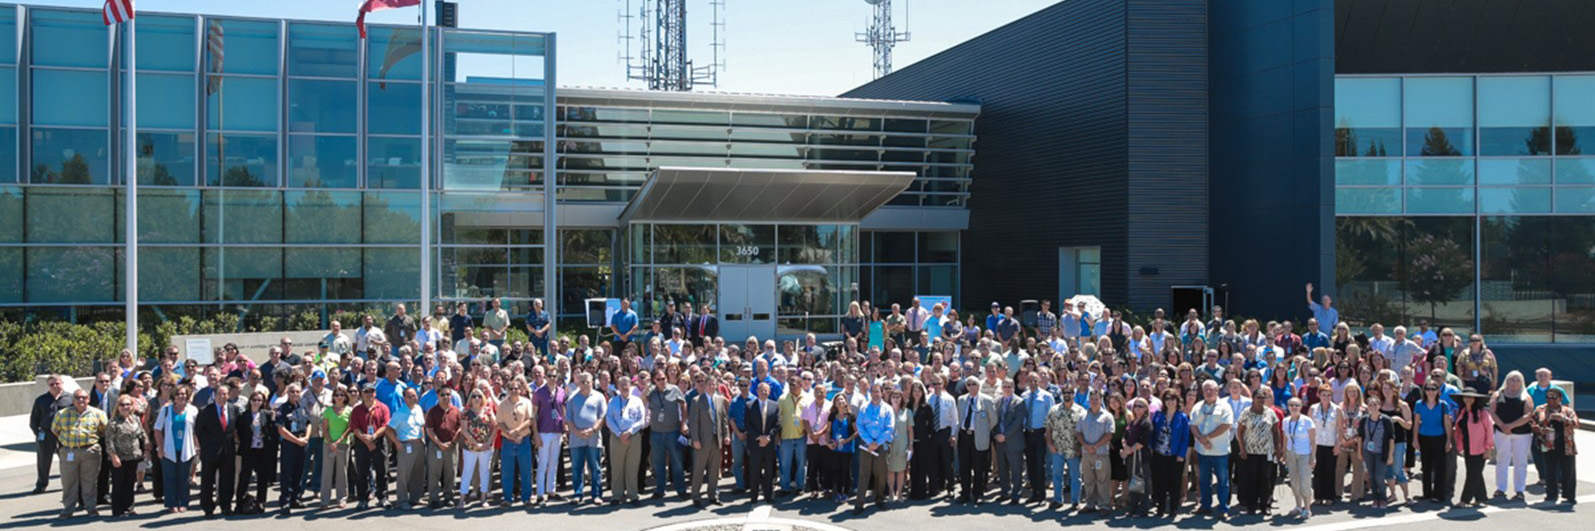 Cal OES Staff picture by the front door of headquarters